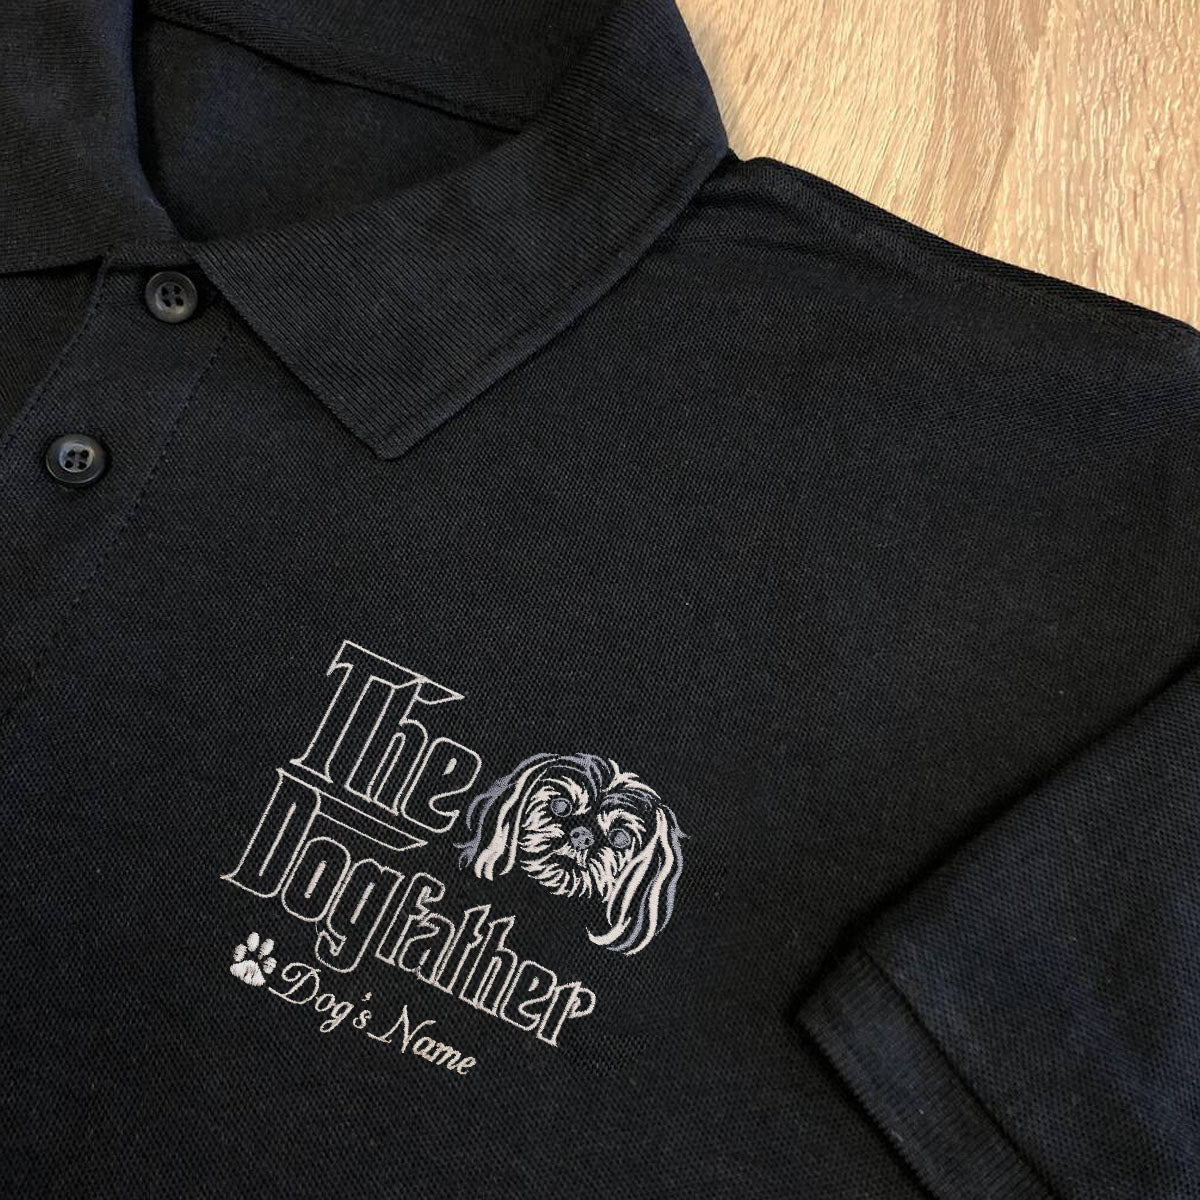 Personalized The DogFather Embroidered Polo Shirt Shih Tzu, Custom Polo Shirt with Dog Name, Best Gifts For Shih Tzu Lovers